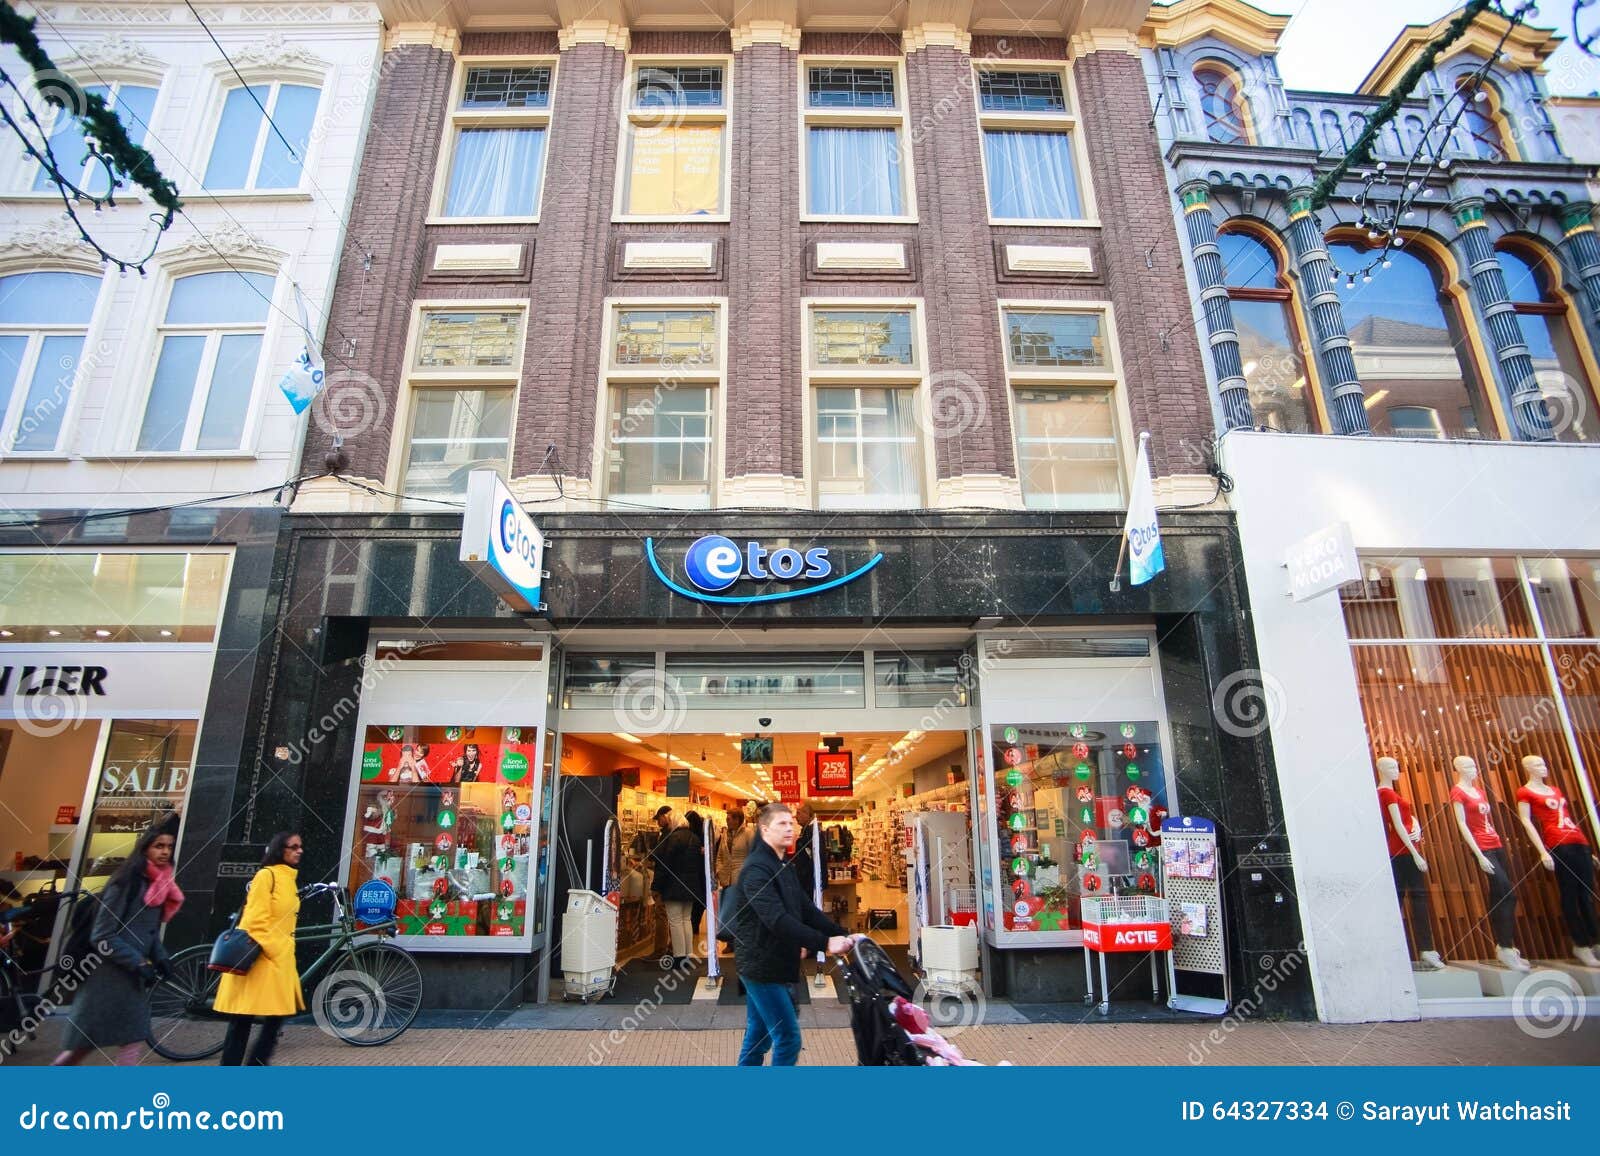 Shopping Plaza Of The Groningen City On Christmas Holiday Editorial ...